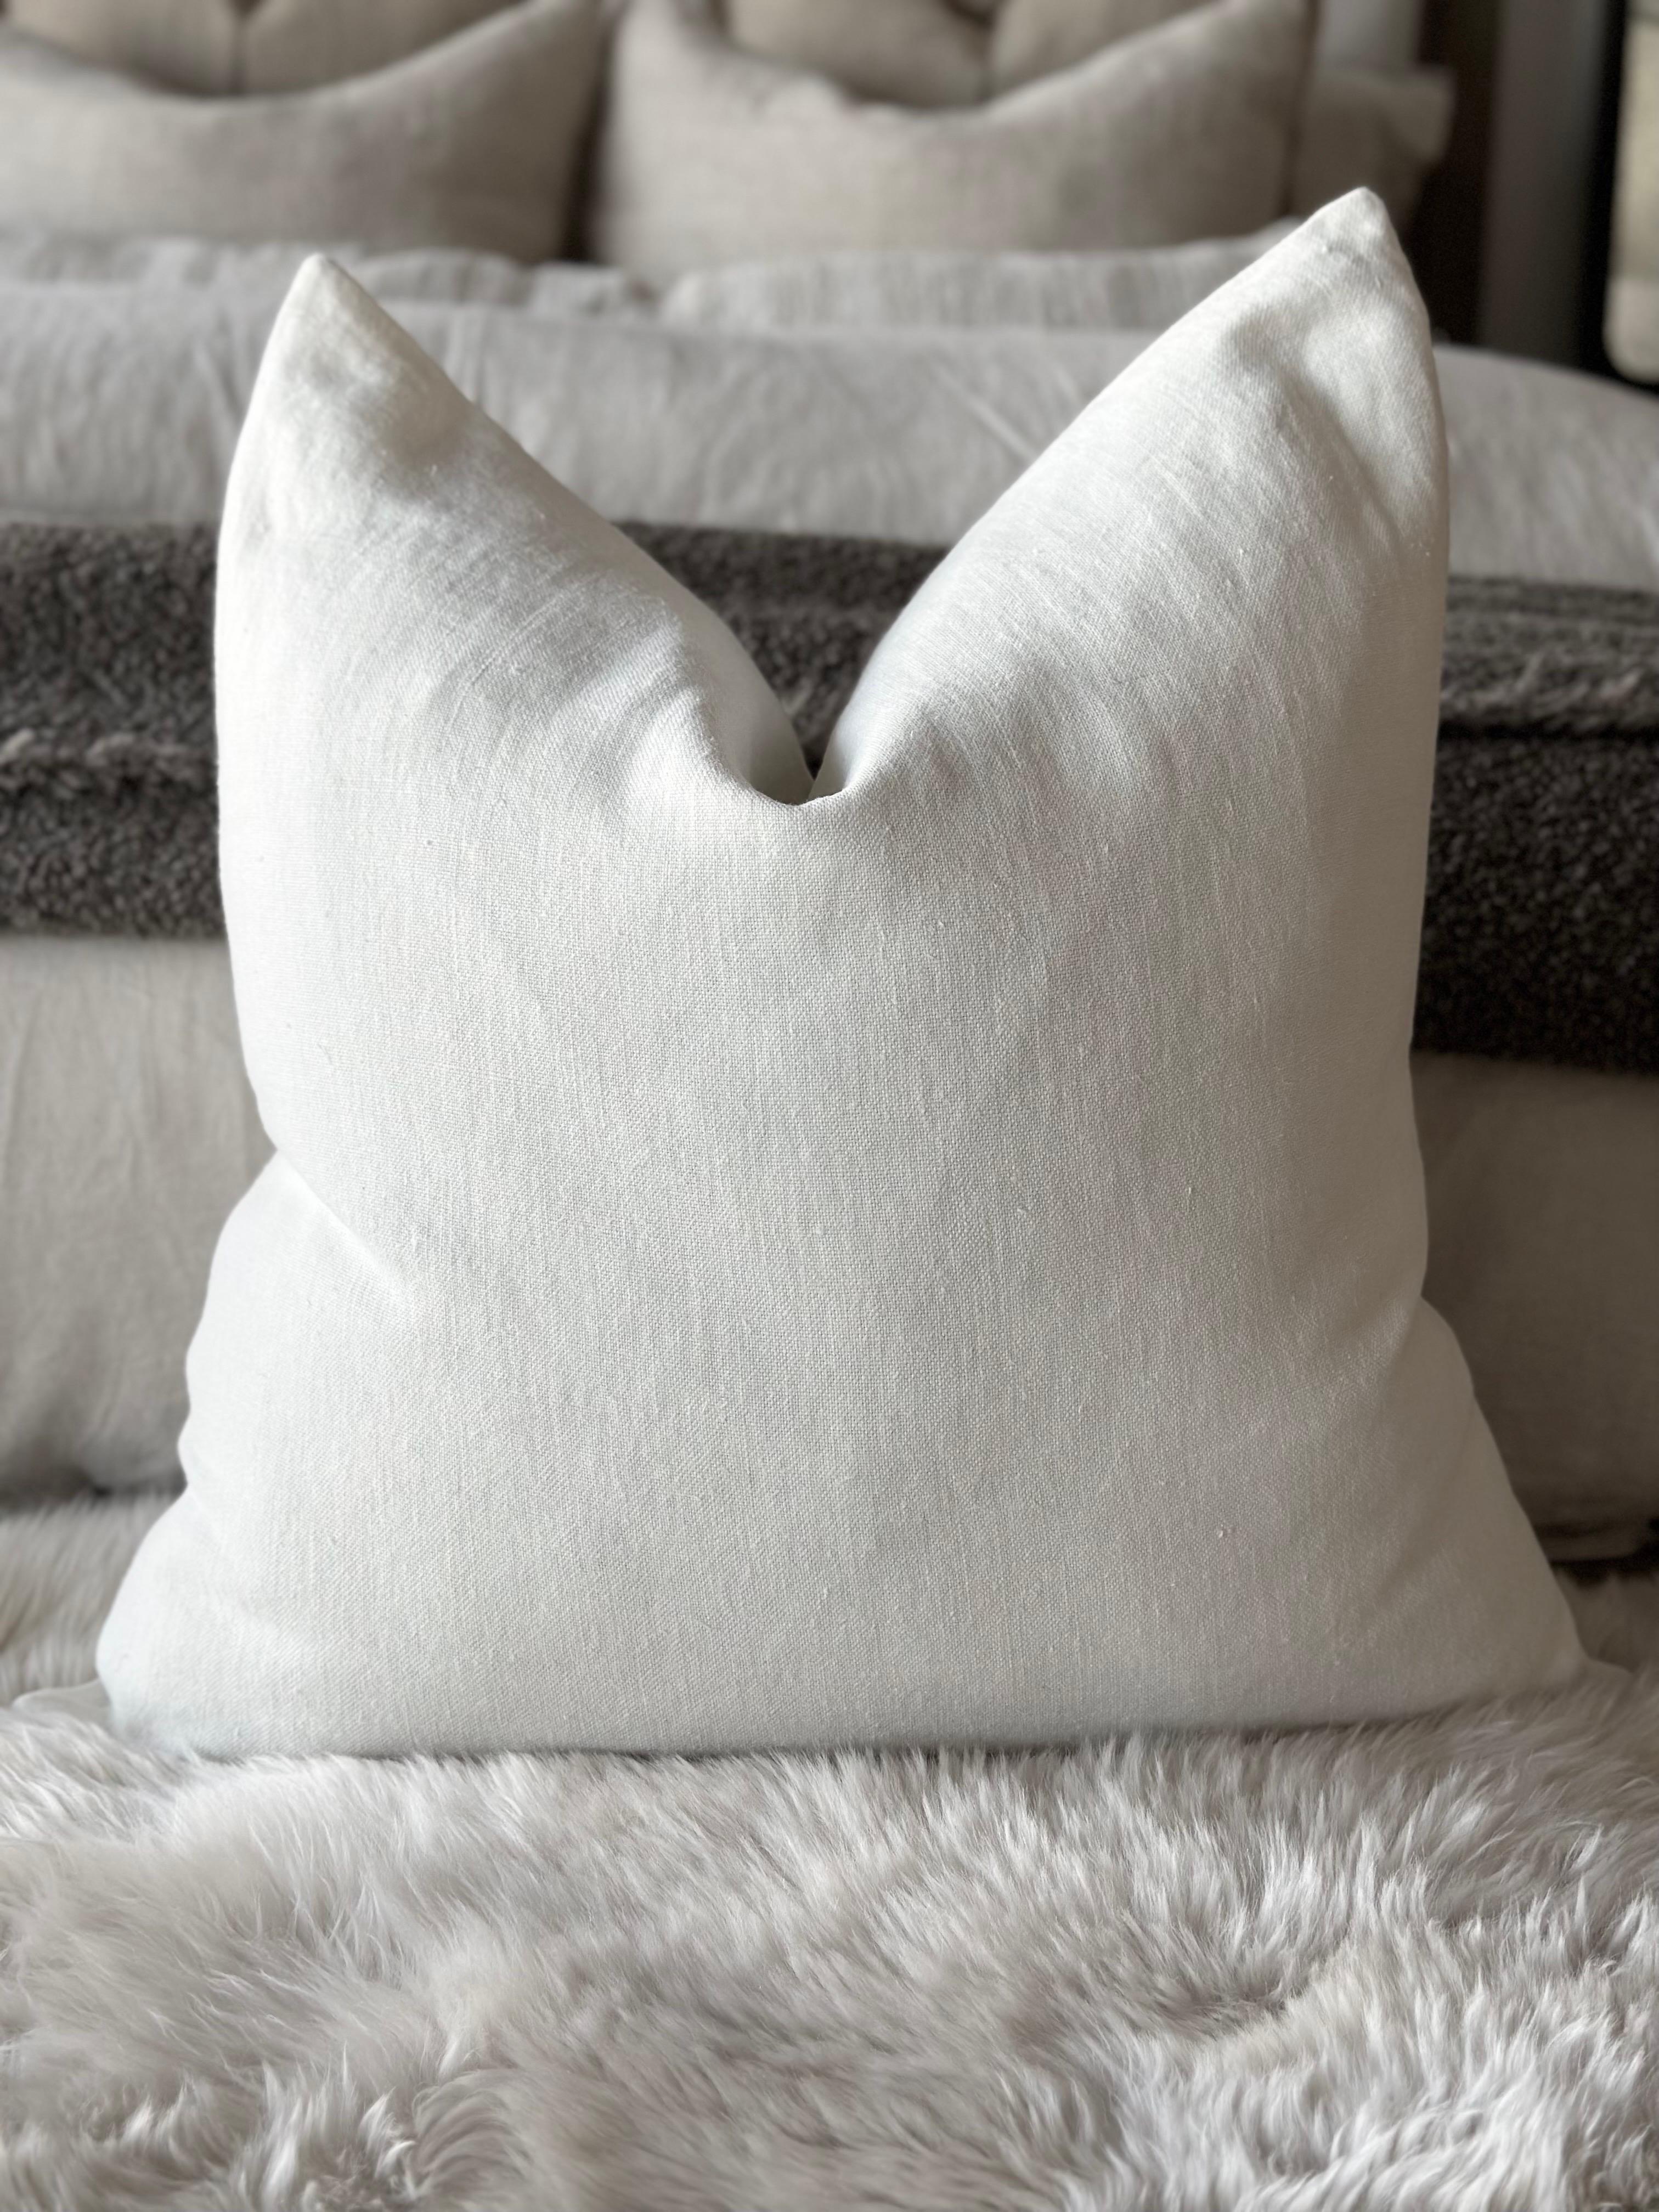 100% Linen
Made in Belgium
Natural Flax Linen Pillow cover with overlocked seams and hidden zipper closure.
Size 25